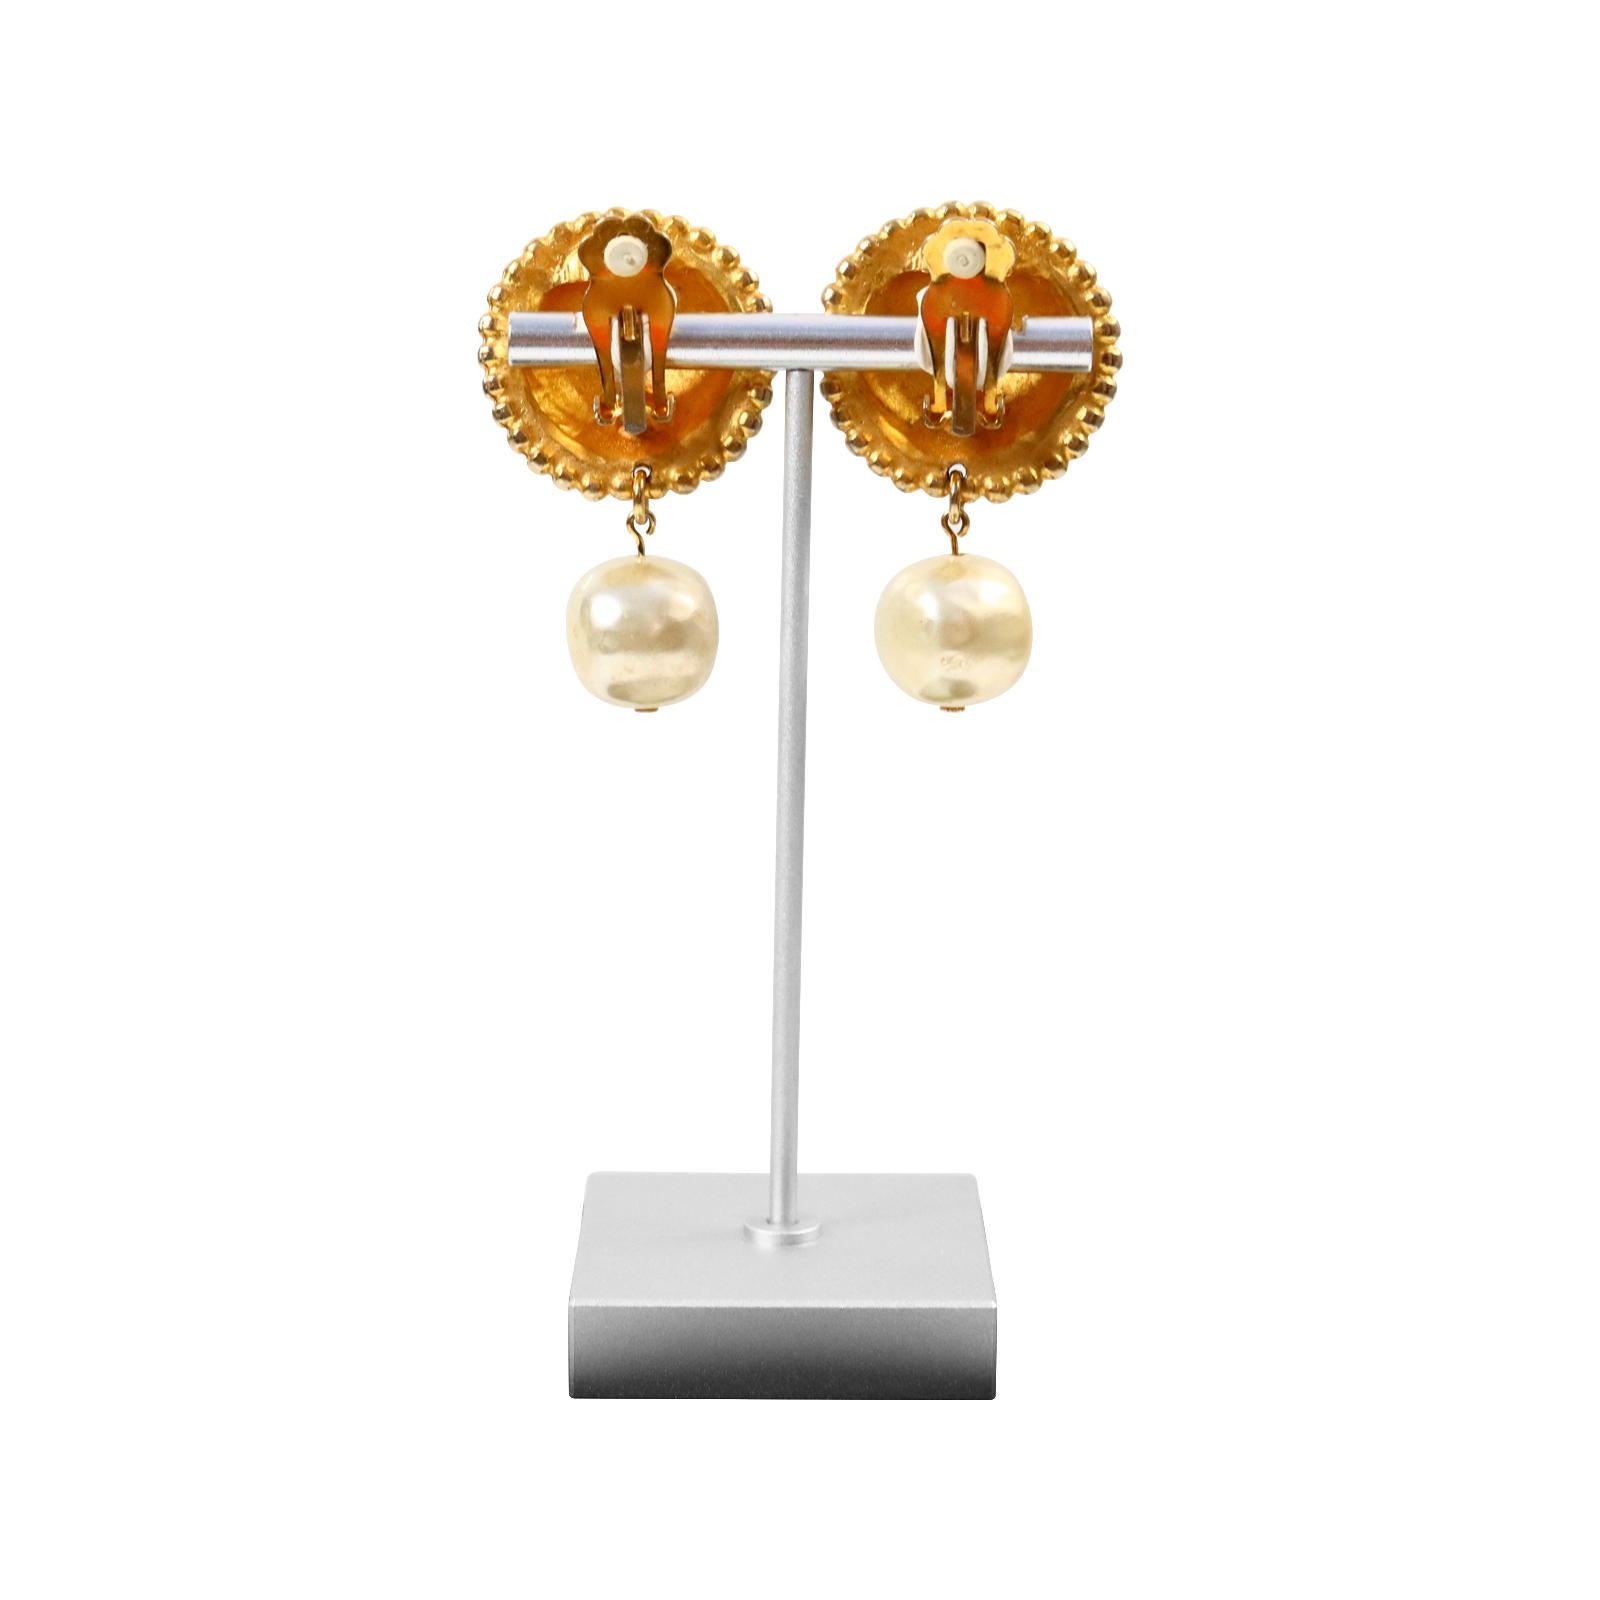 Modern Vintage EP Gold Byzantine with Faux Dangling Pearl Earrings Circa 1980s For Sale